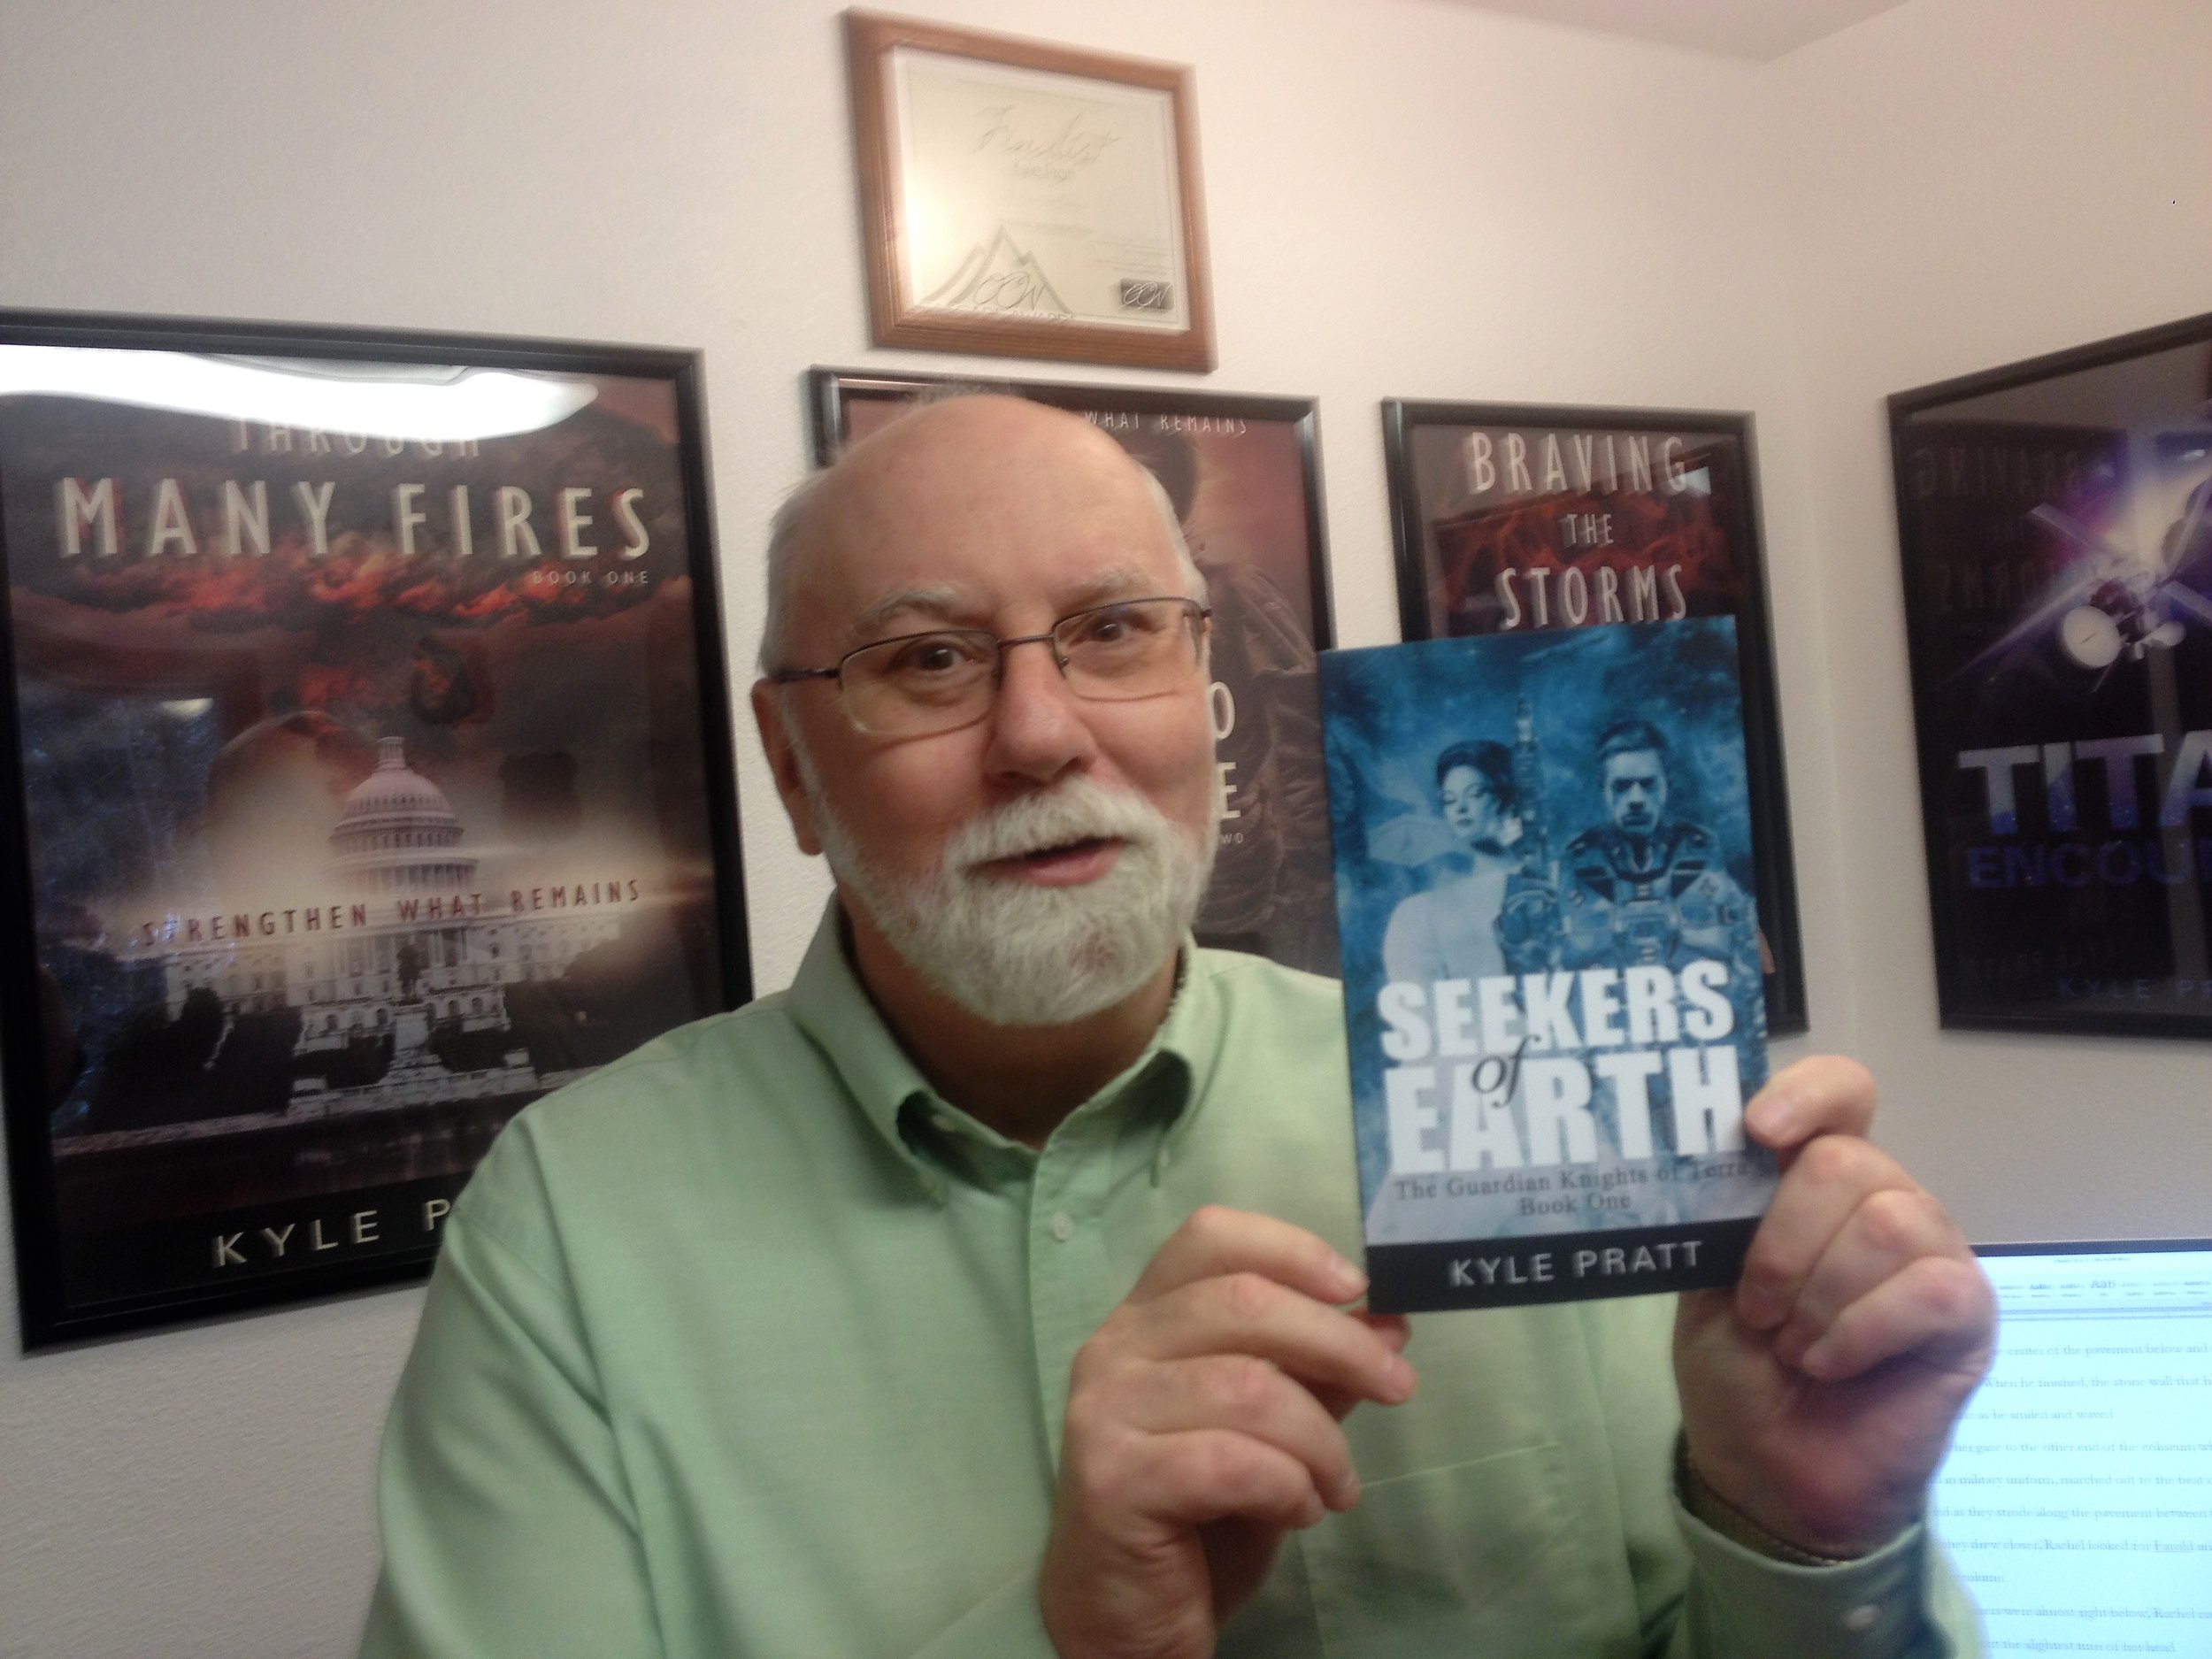  Kyle with a copy of Seekers of Earth 